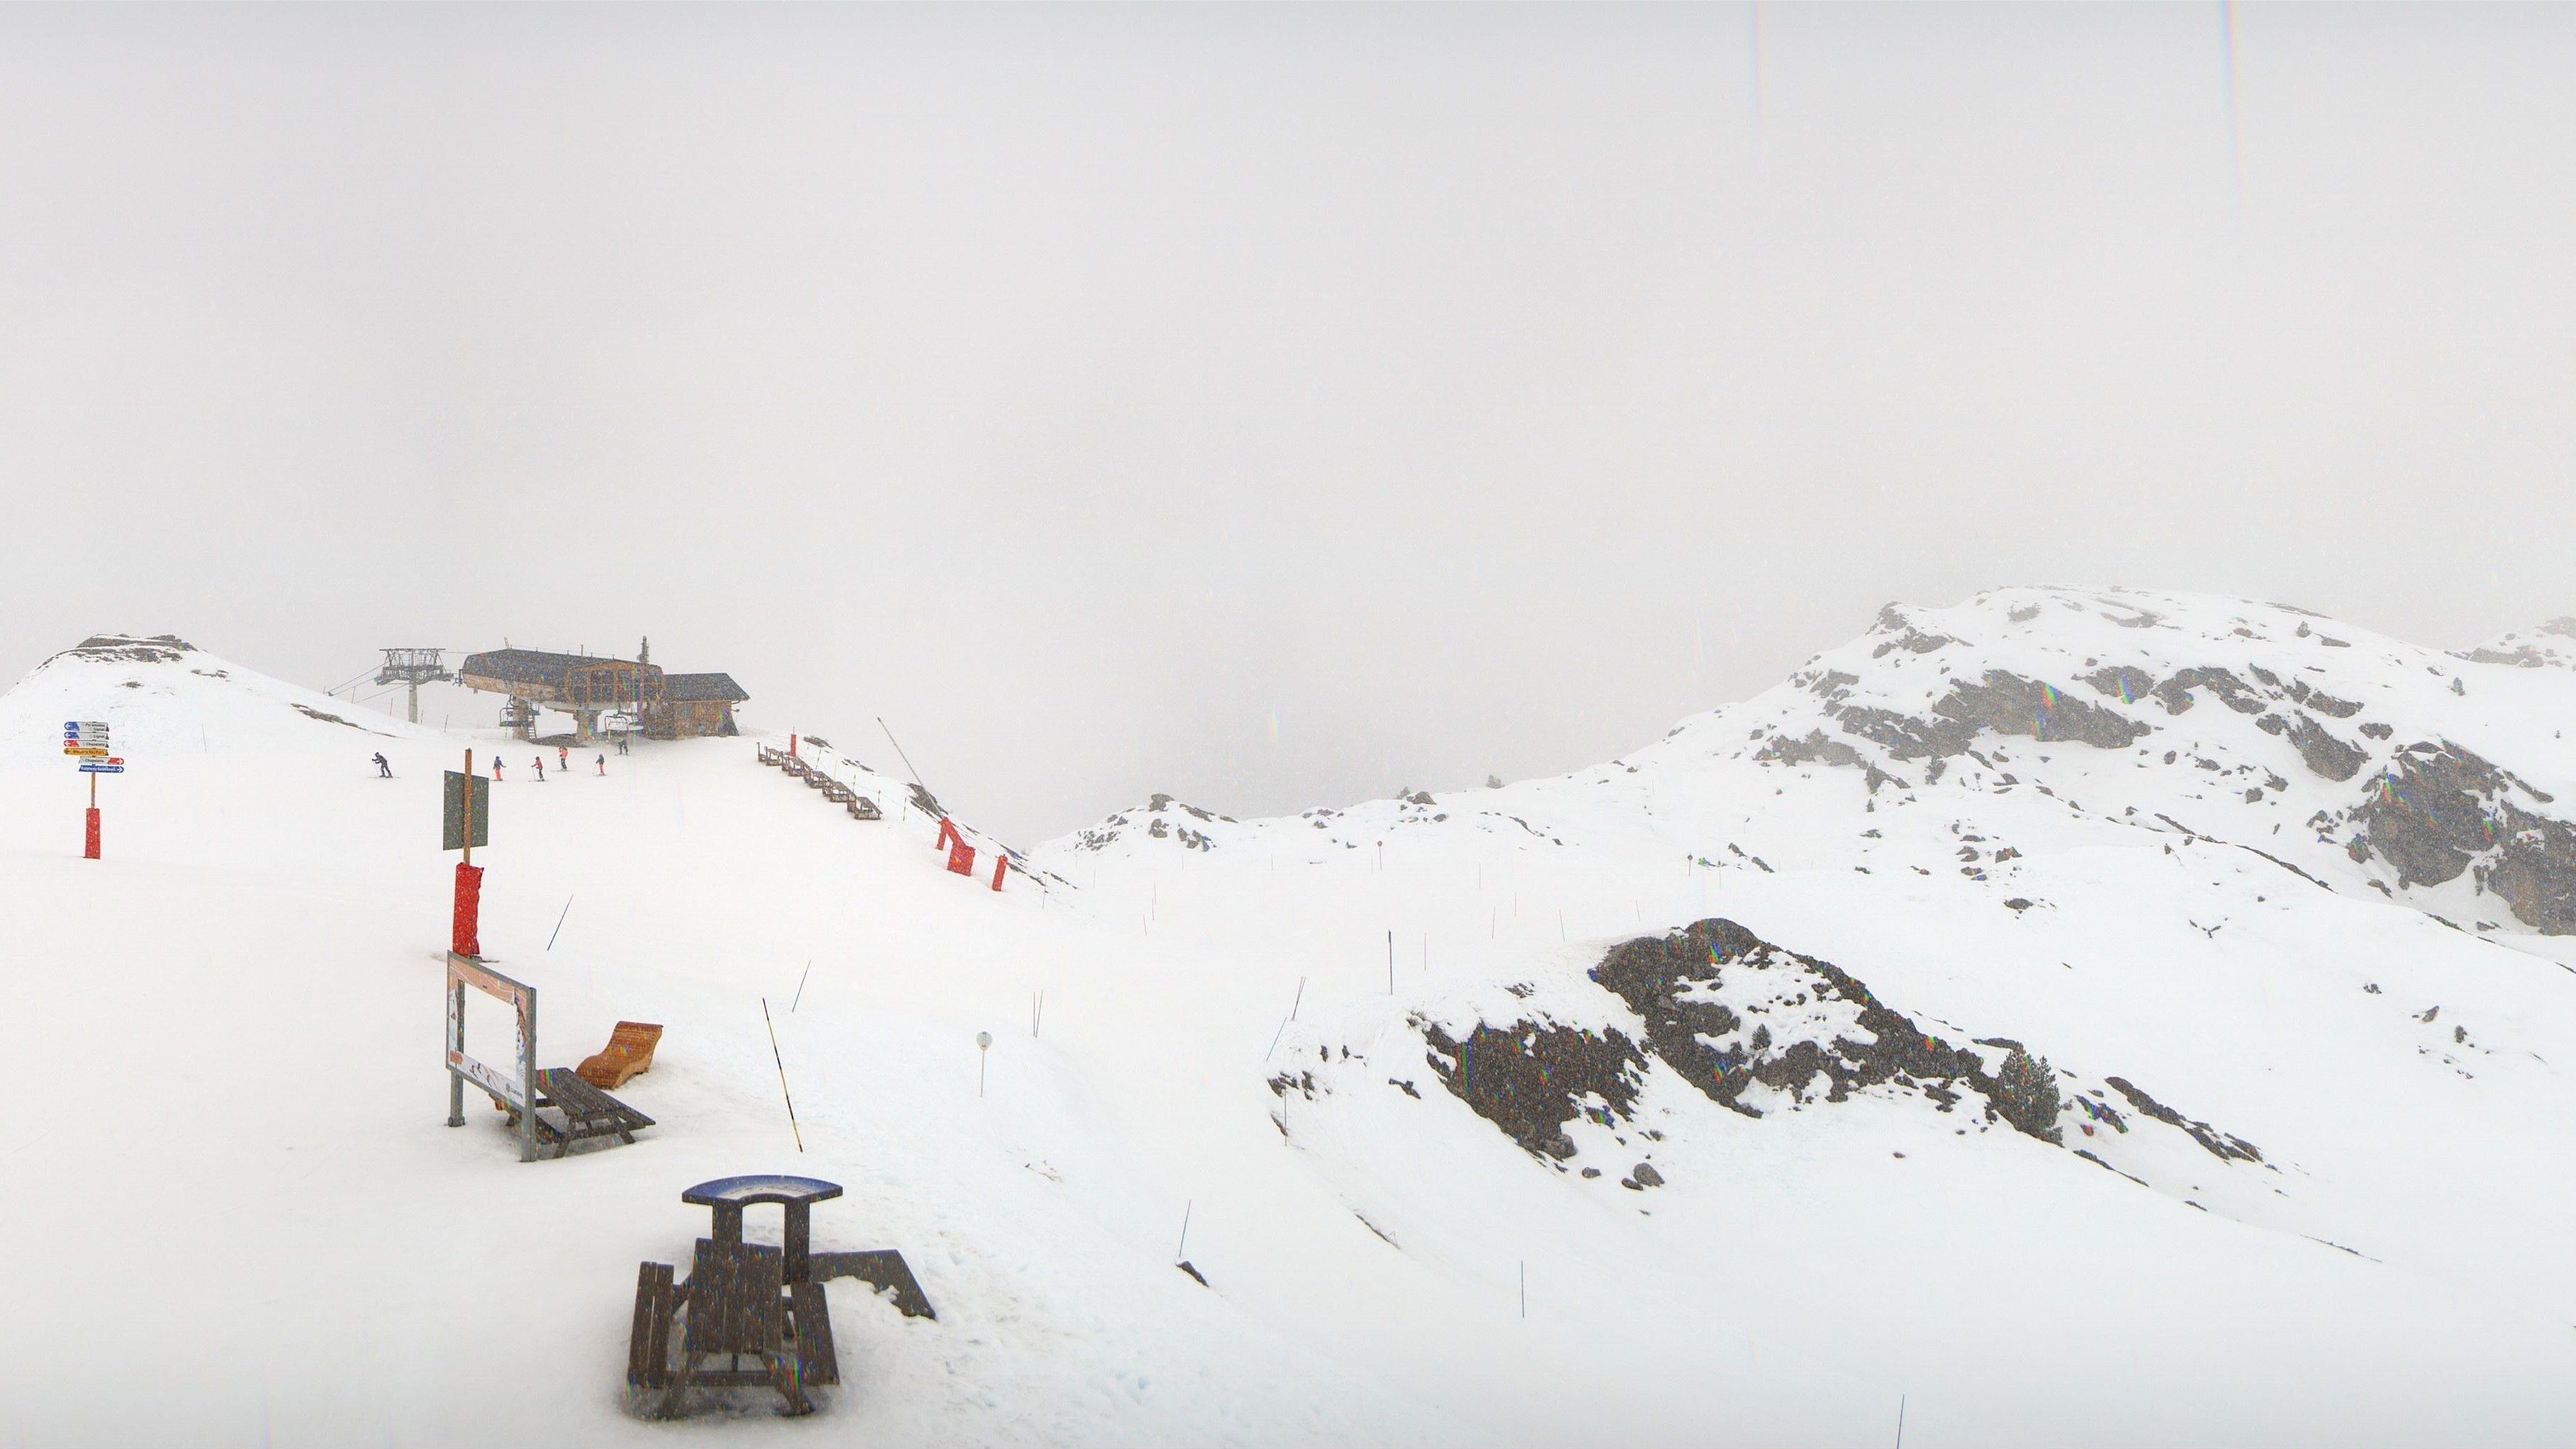 In Courchevel, it started snowing this afternoon (roundshot.com)